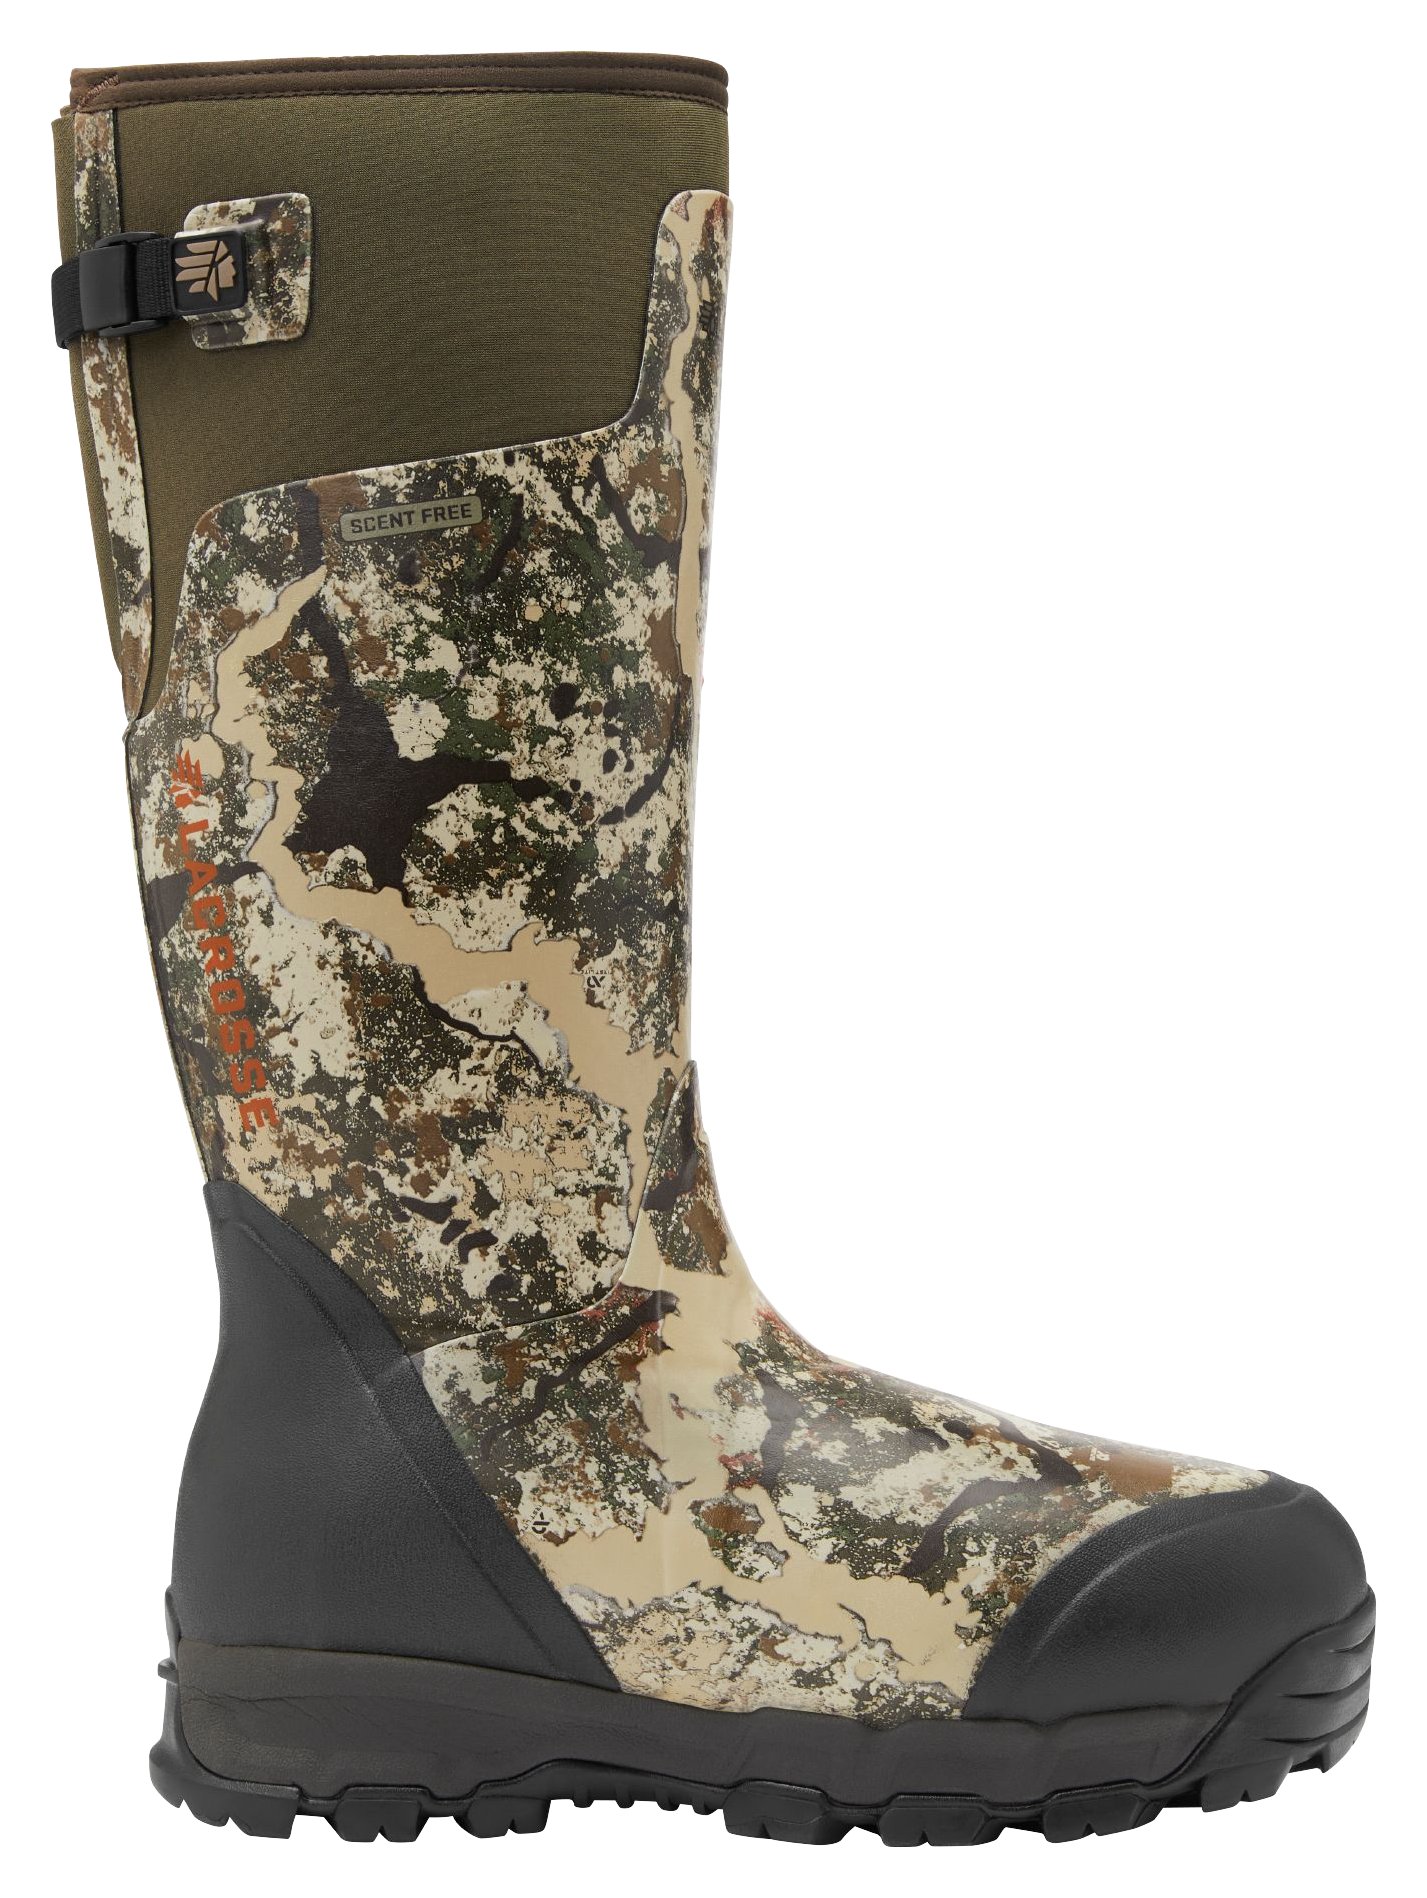 LaCrosse AlphaBurly Pro 1,600 Insulated Hunting Boots for Men - First Lite Specter - 7M